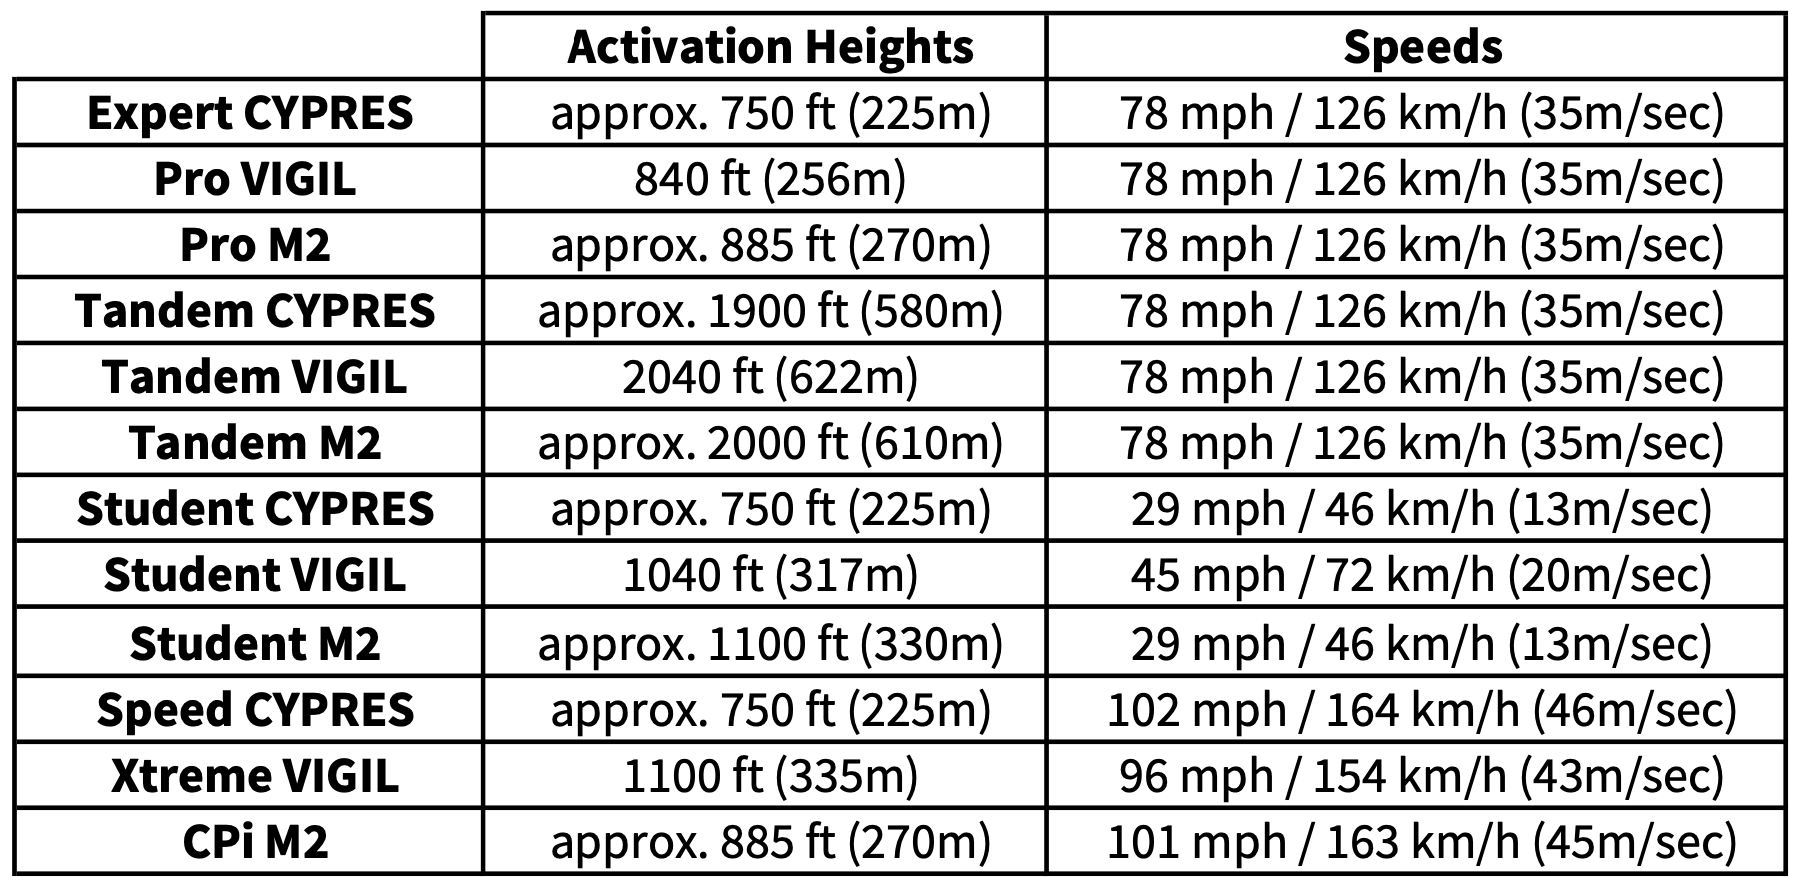 AAD Activation Heights Table